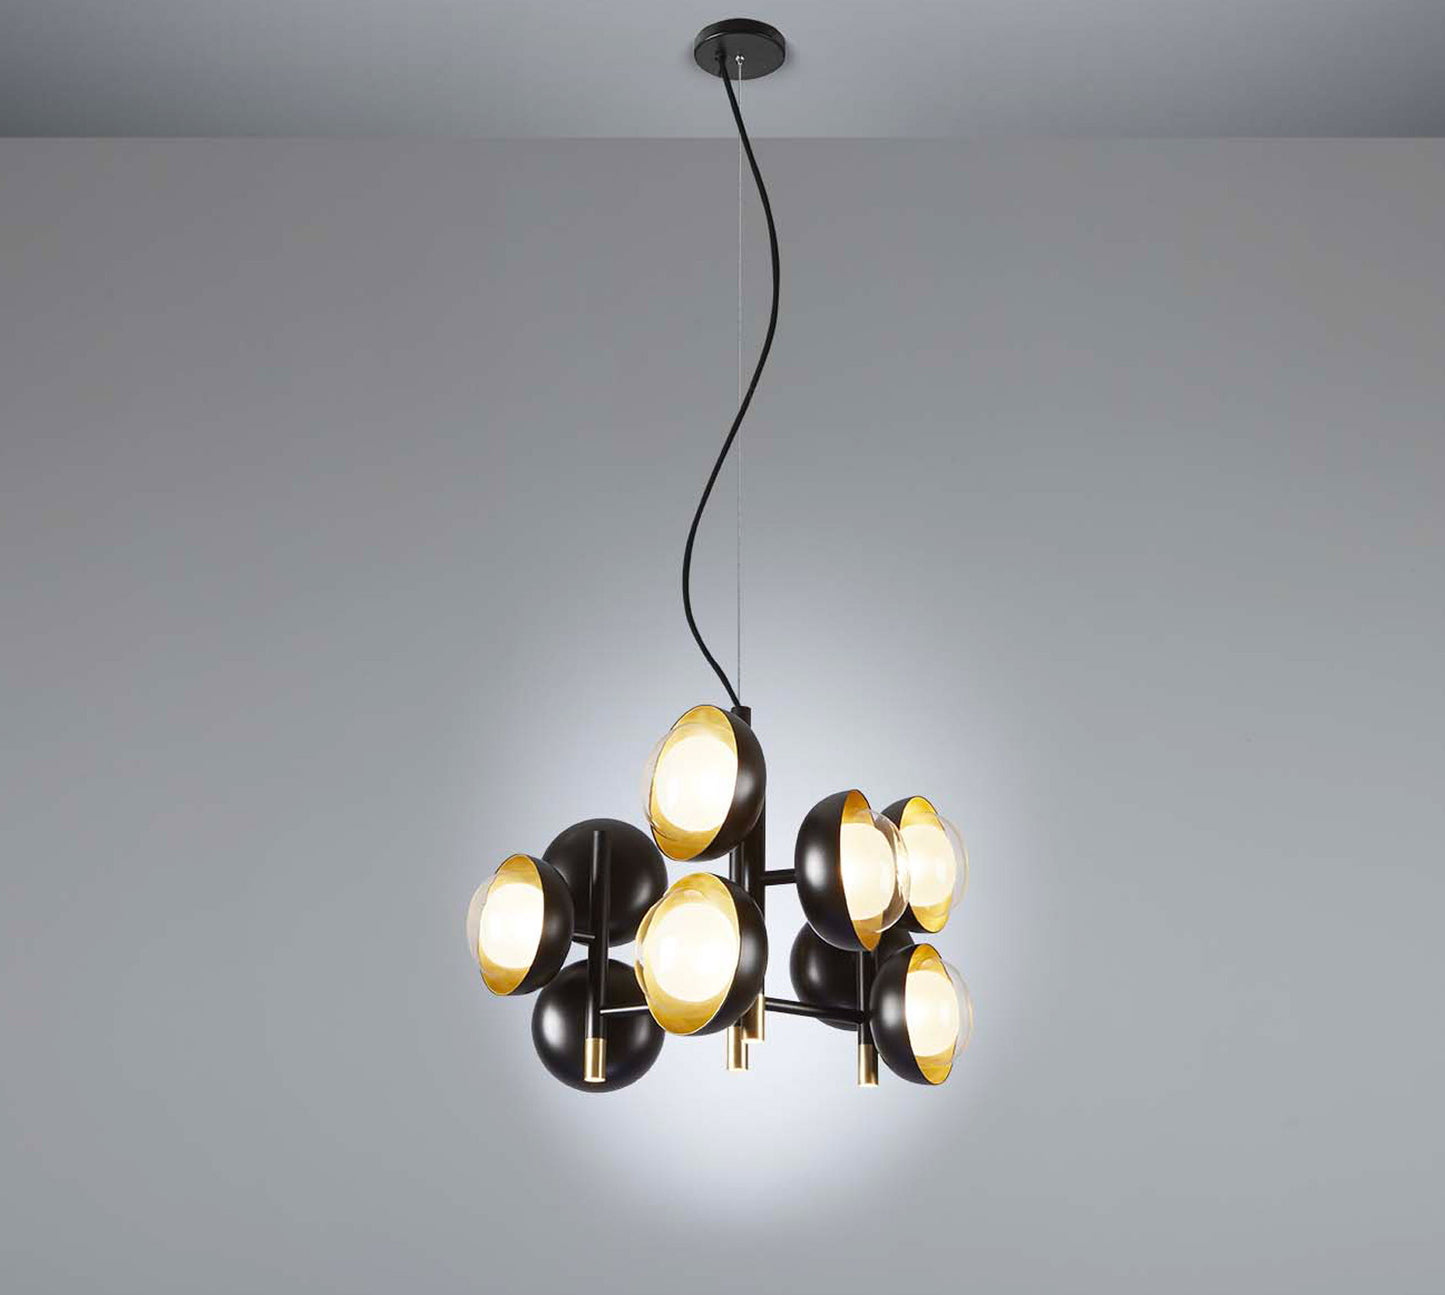 MUSE CHANDELIER 554.13 BY TOOY $6,298.00